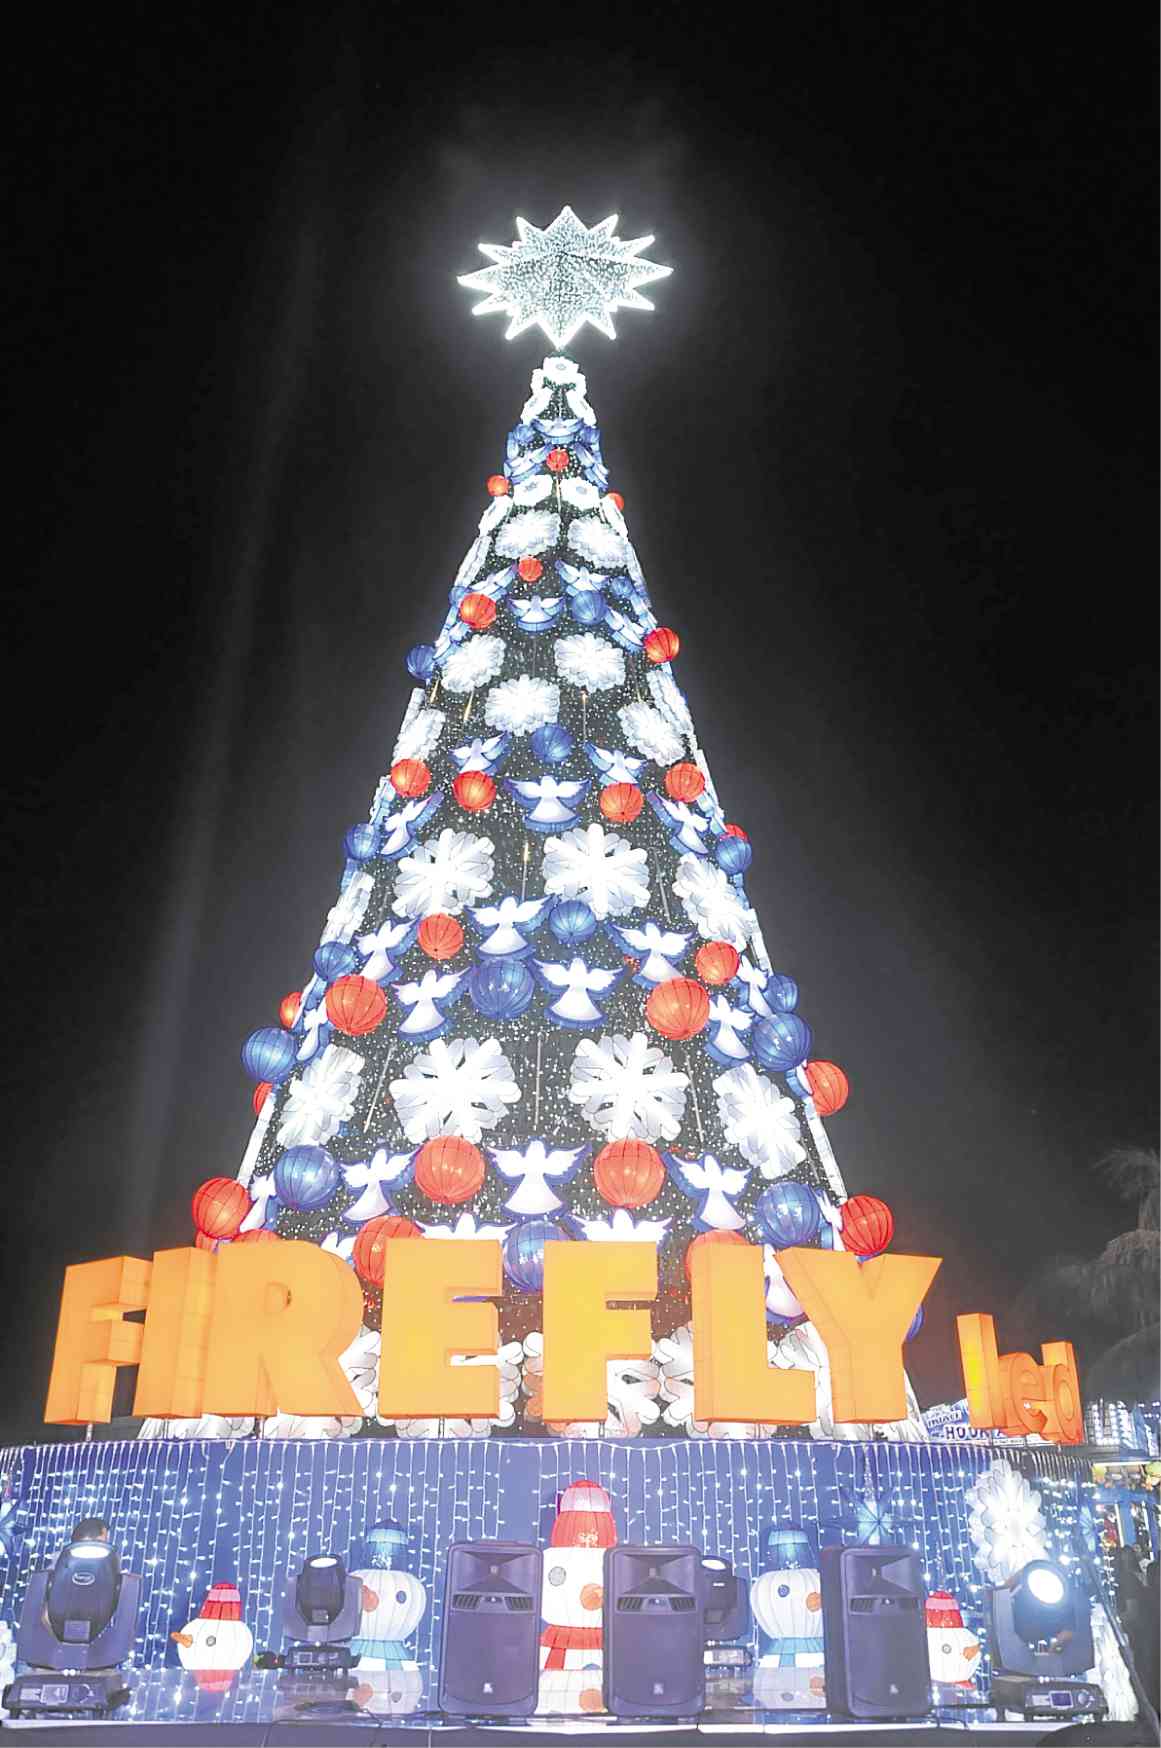 Over 40,000 Firefly LED lights were used to decorate this tree at SM Mall of Asia.